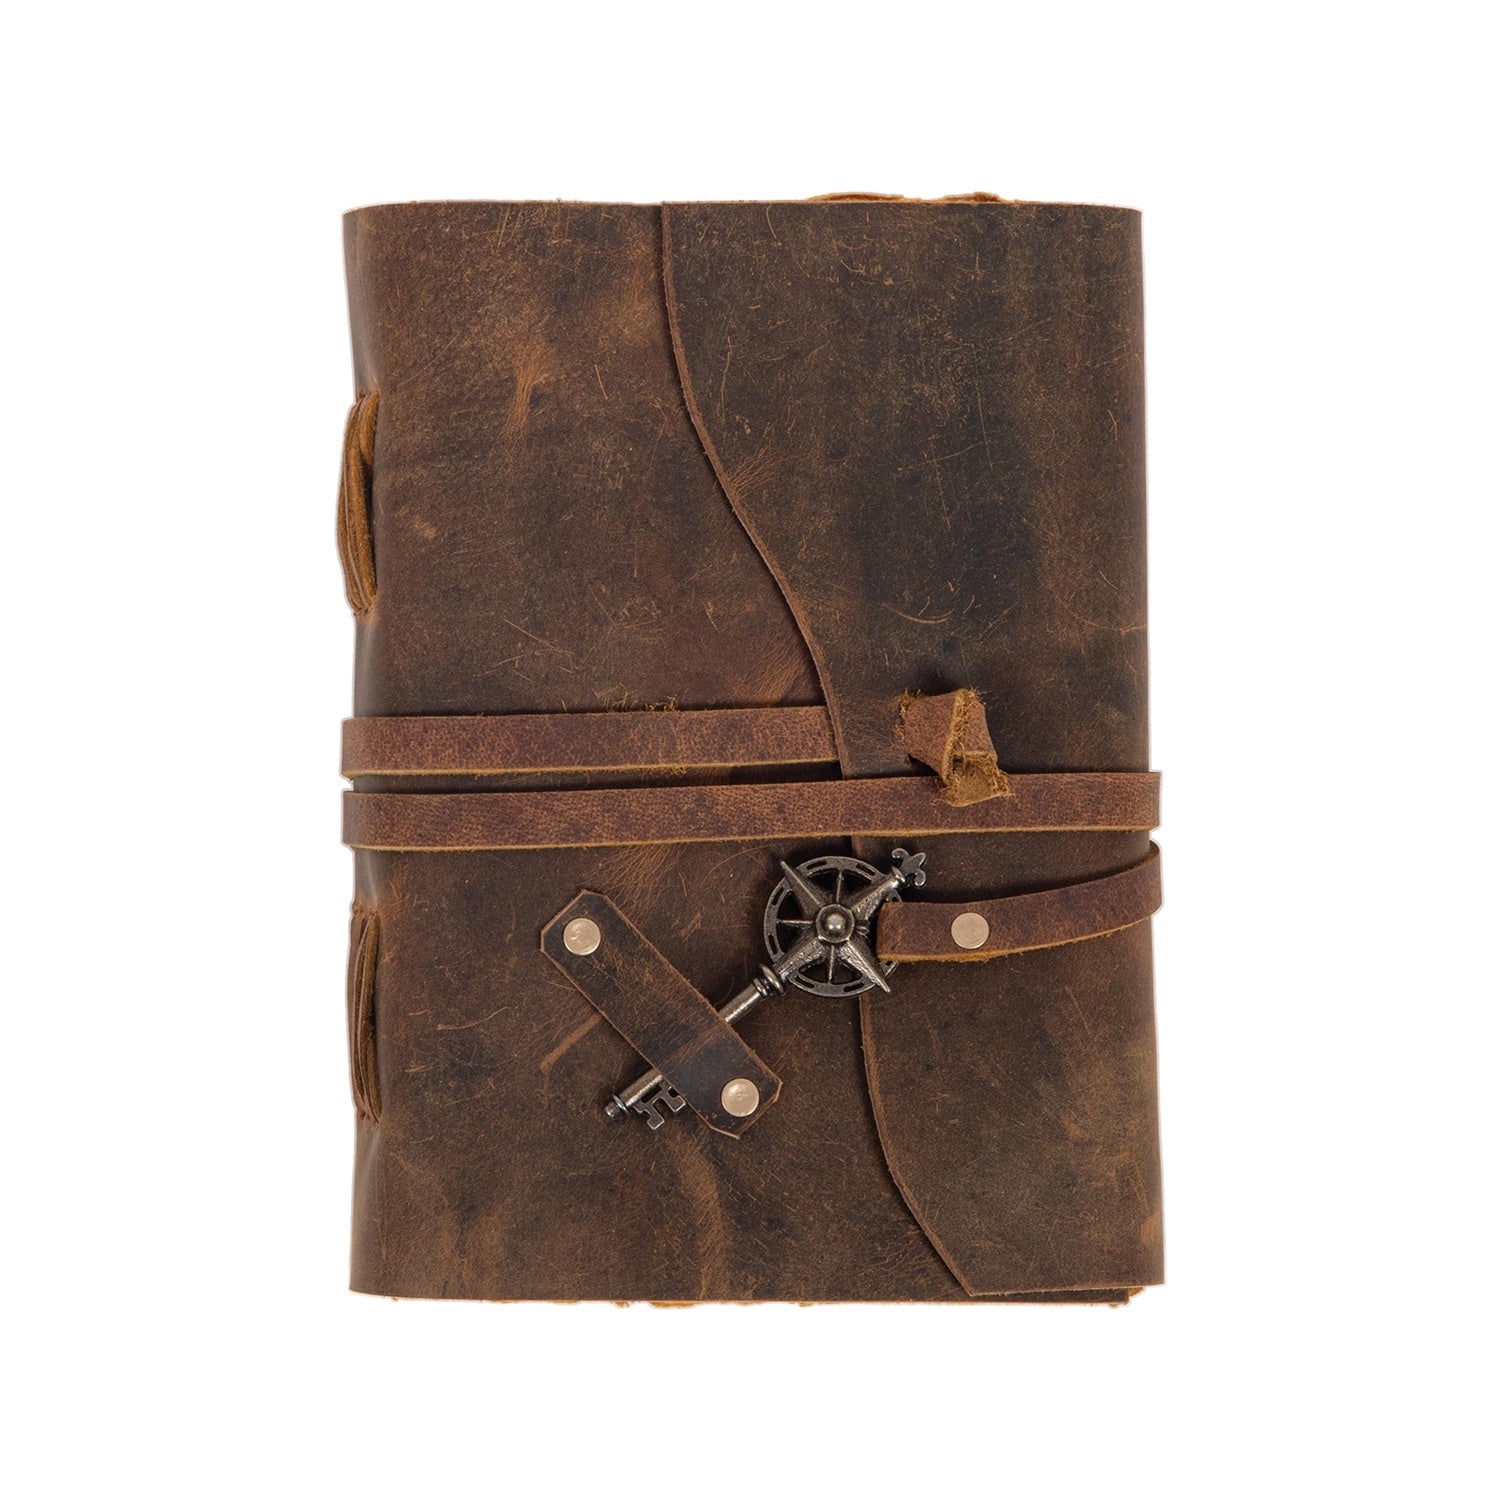 Timeless Traveller's Leather Bound Journal